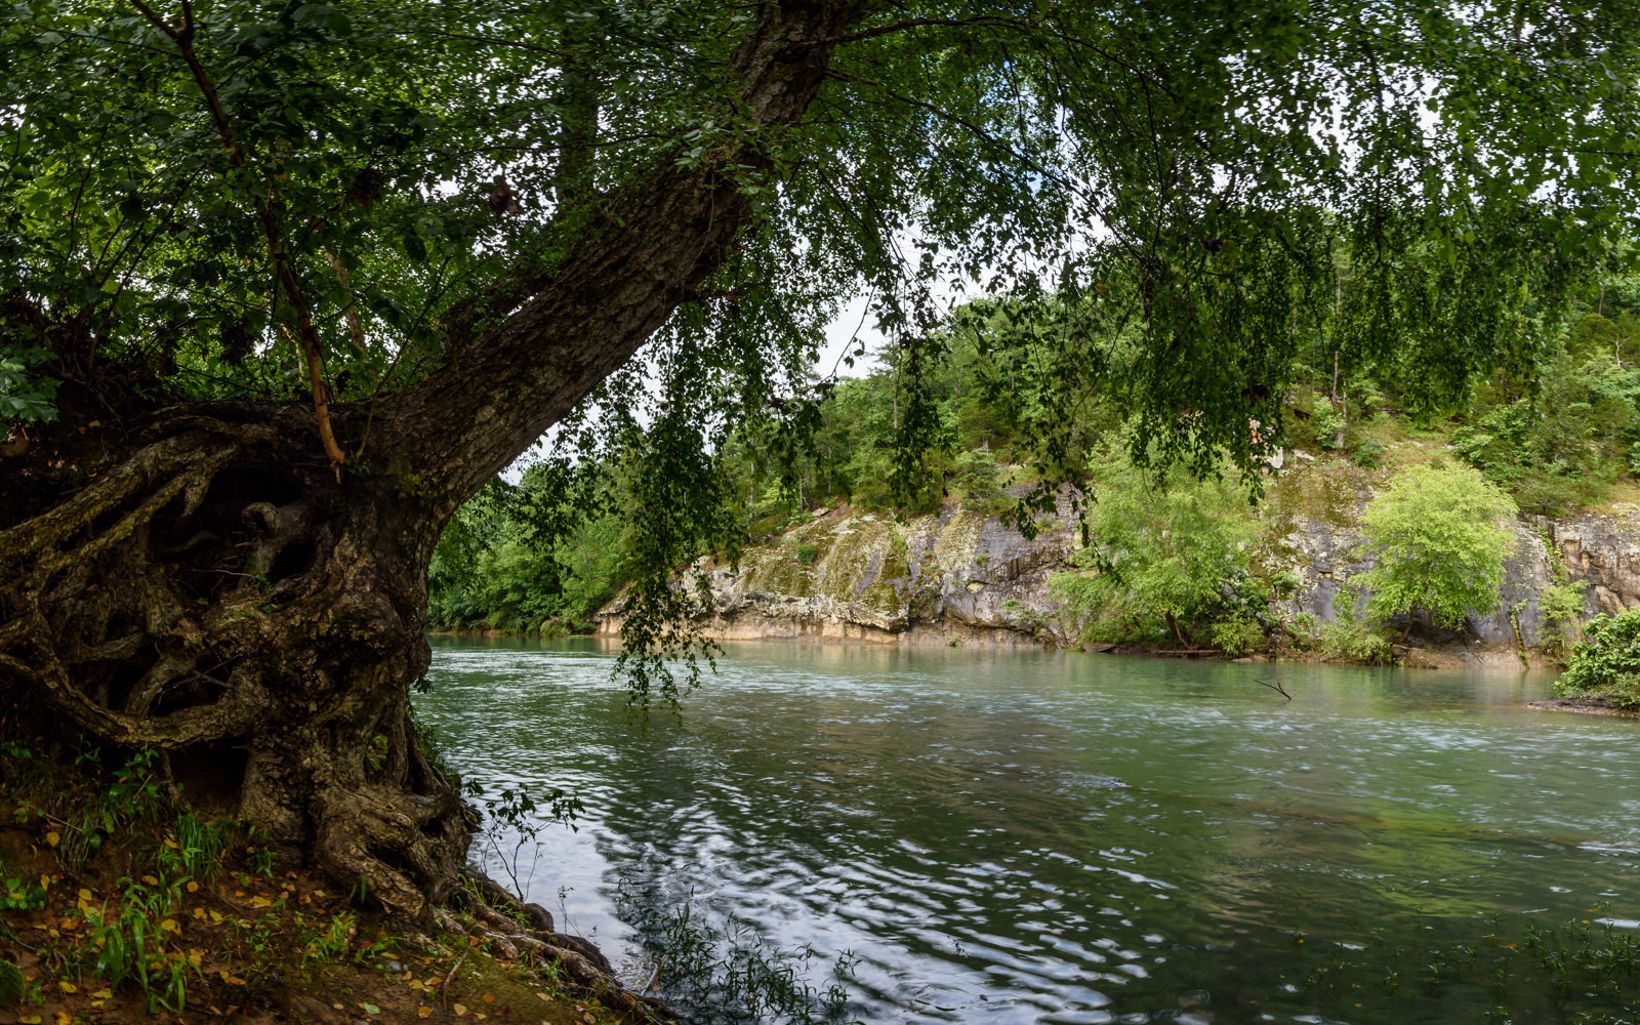 The Archey Fork of the upper Little Red River’s crystal clear waters are a draw for paddlers and swimmers alike.